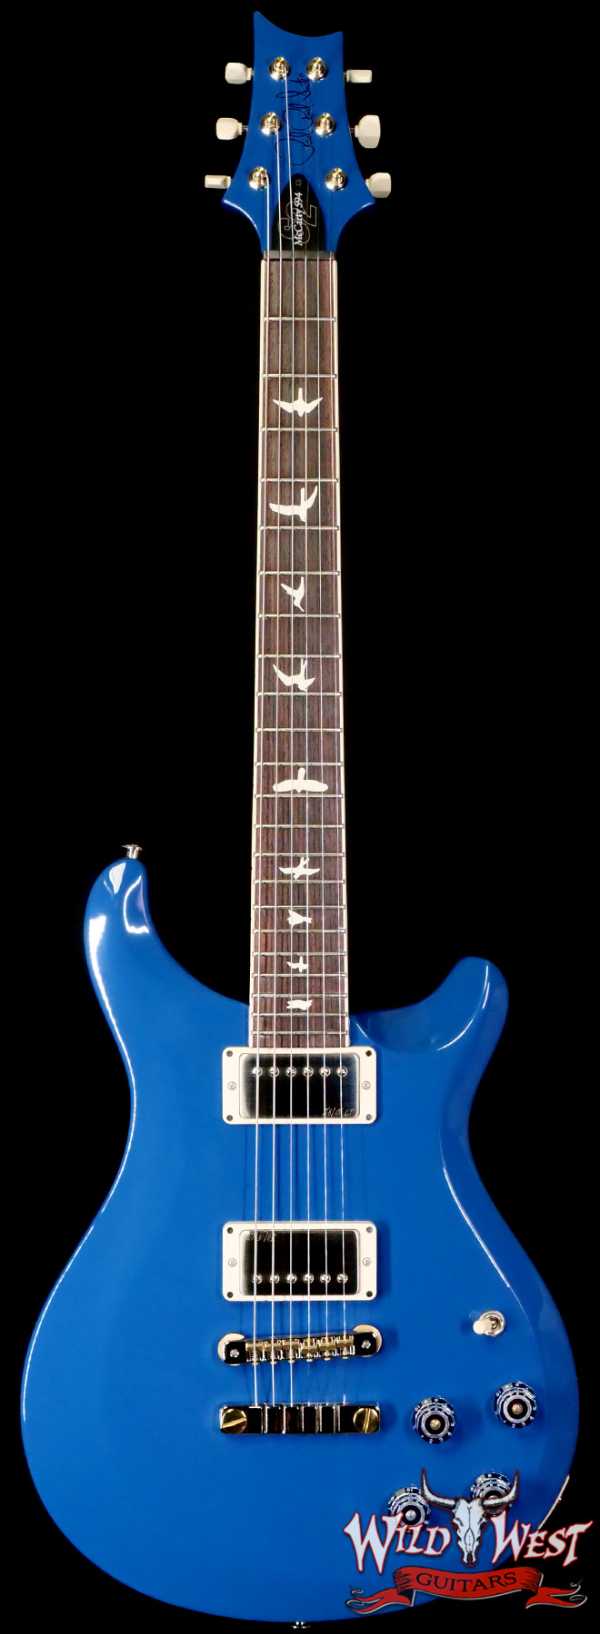 Paul Reed Smith PRS S2 Serise McCarty 594 Thinline Space Blue 6.35 LBS